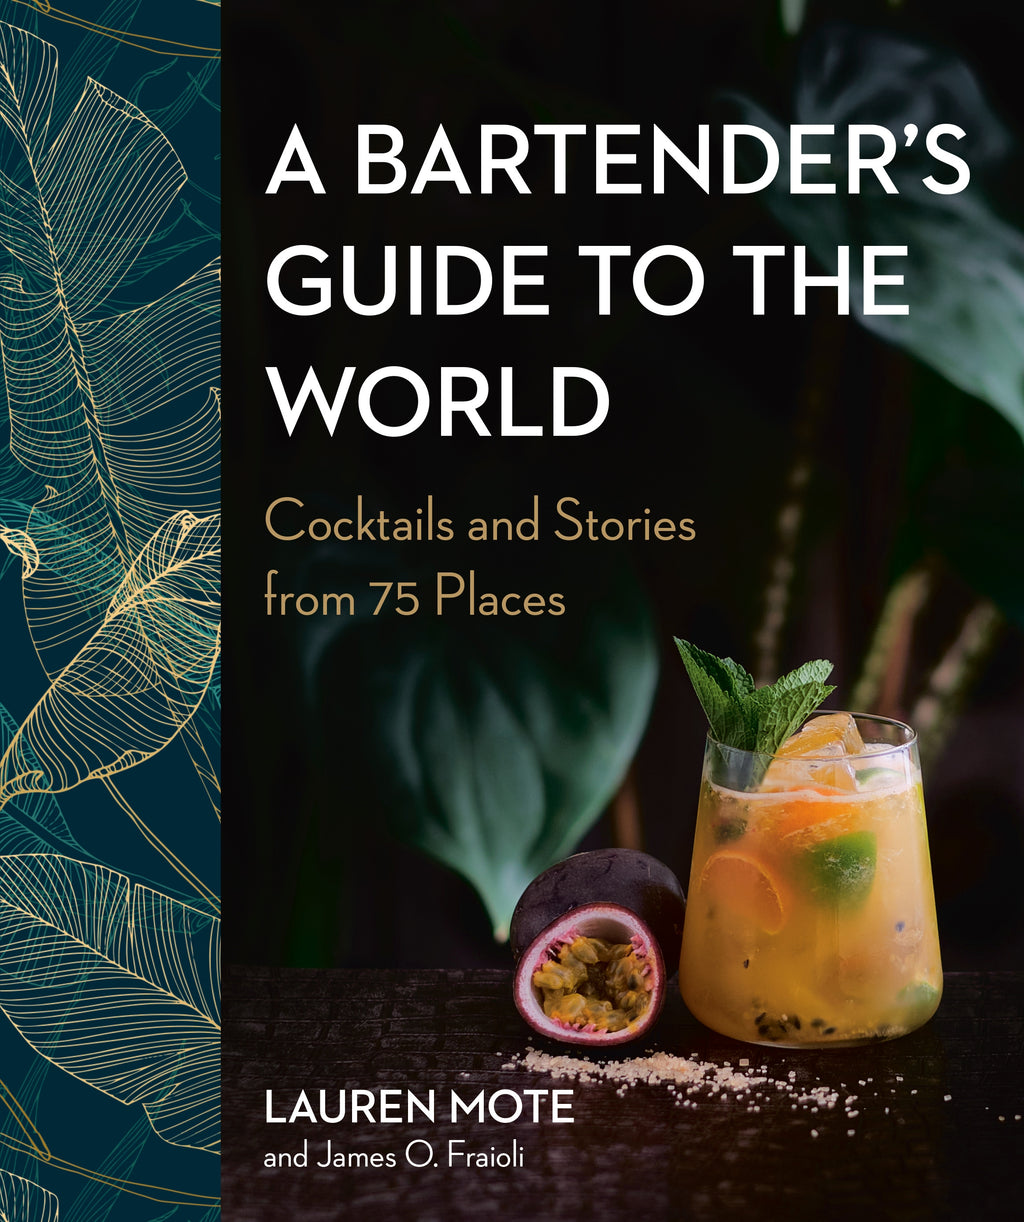 A Bartender's Guide to the World: Cocktails and

Stories from 75 Places